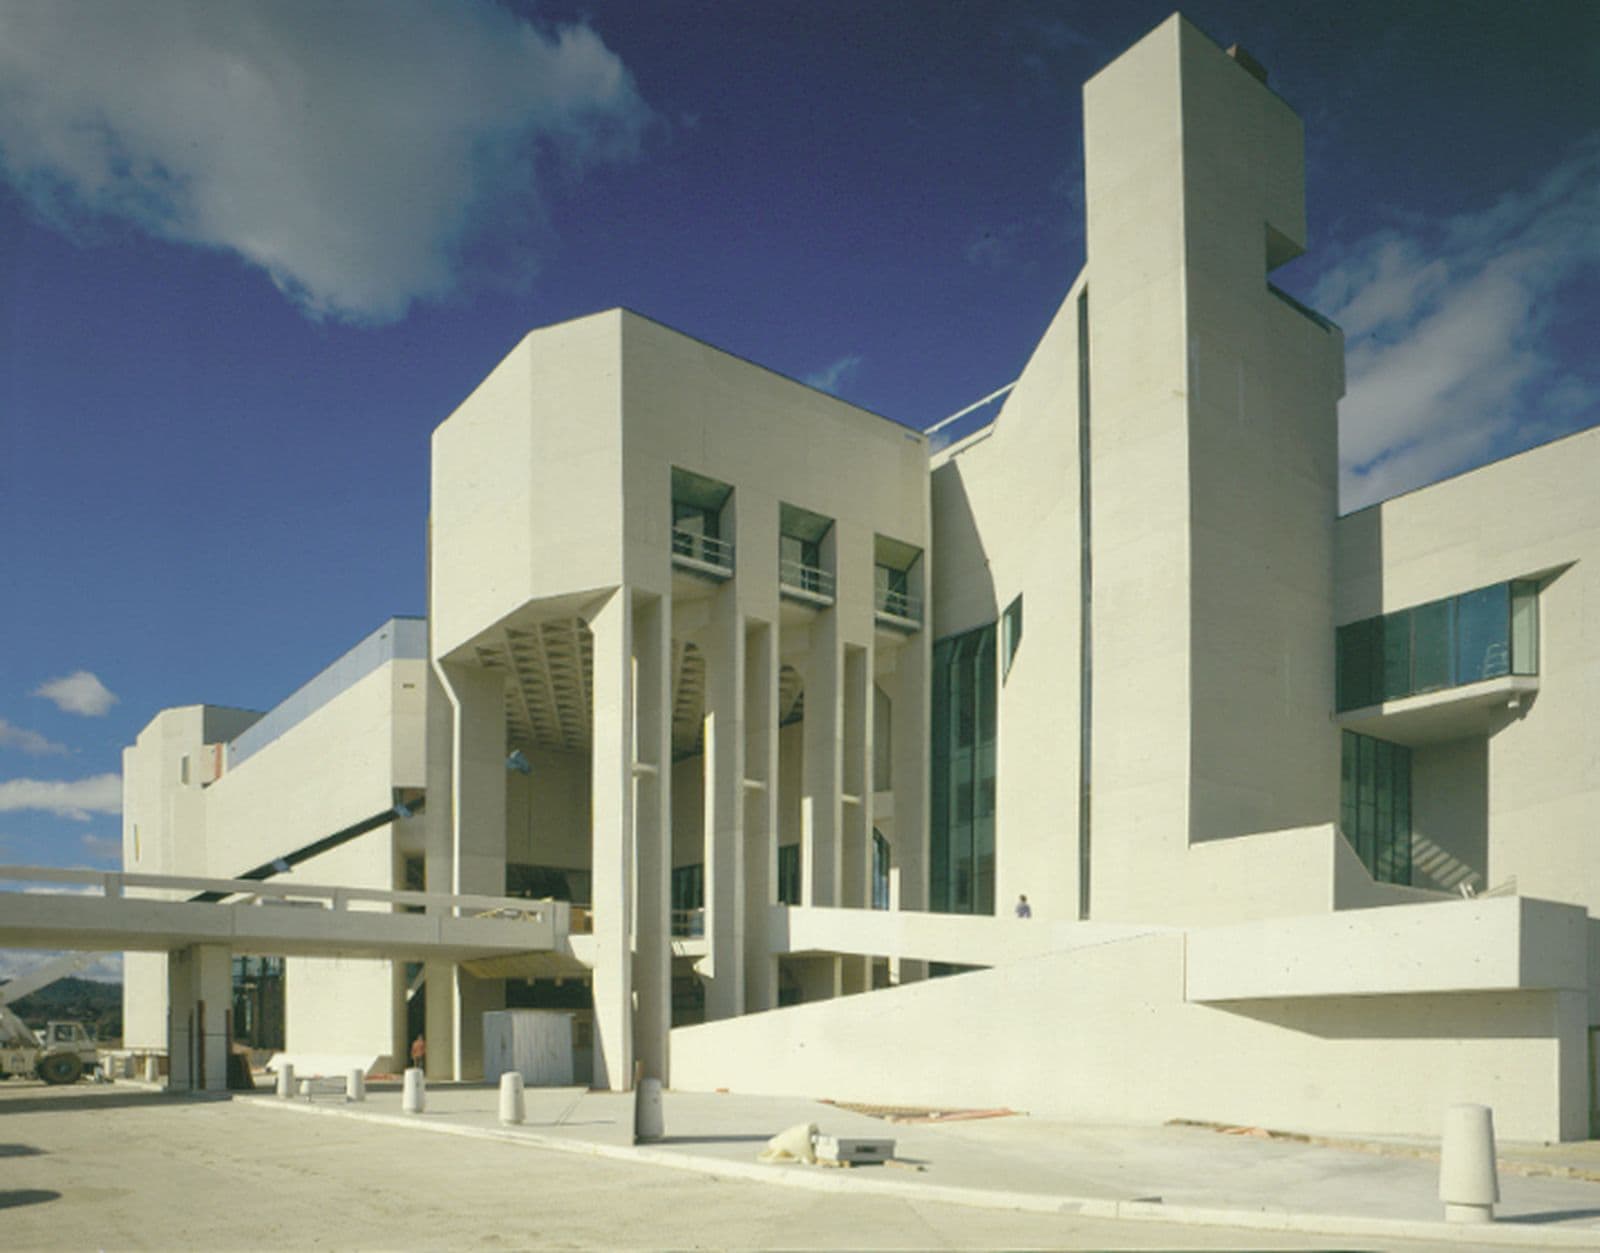 Landscape photo of a largo white concrete building, late in the construction phase